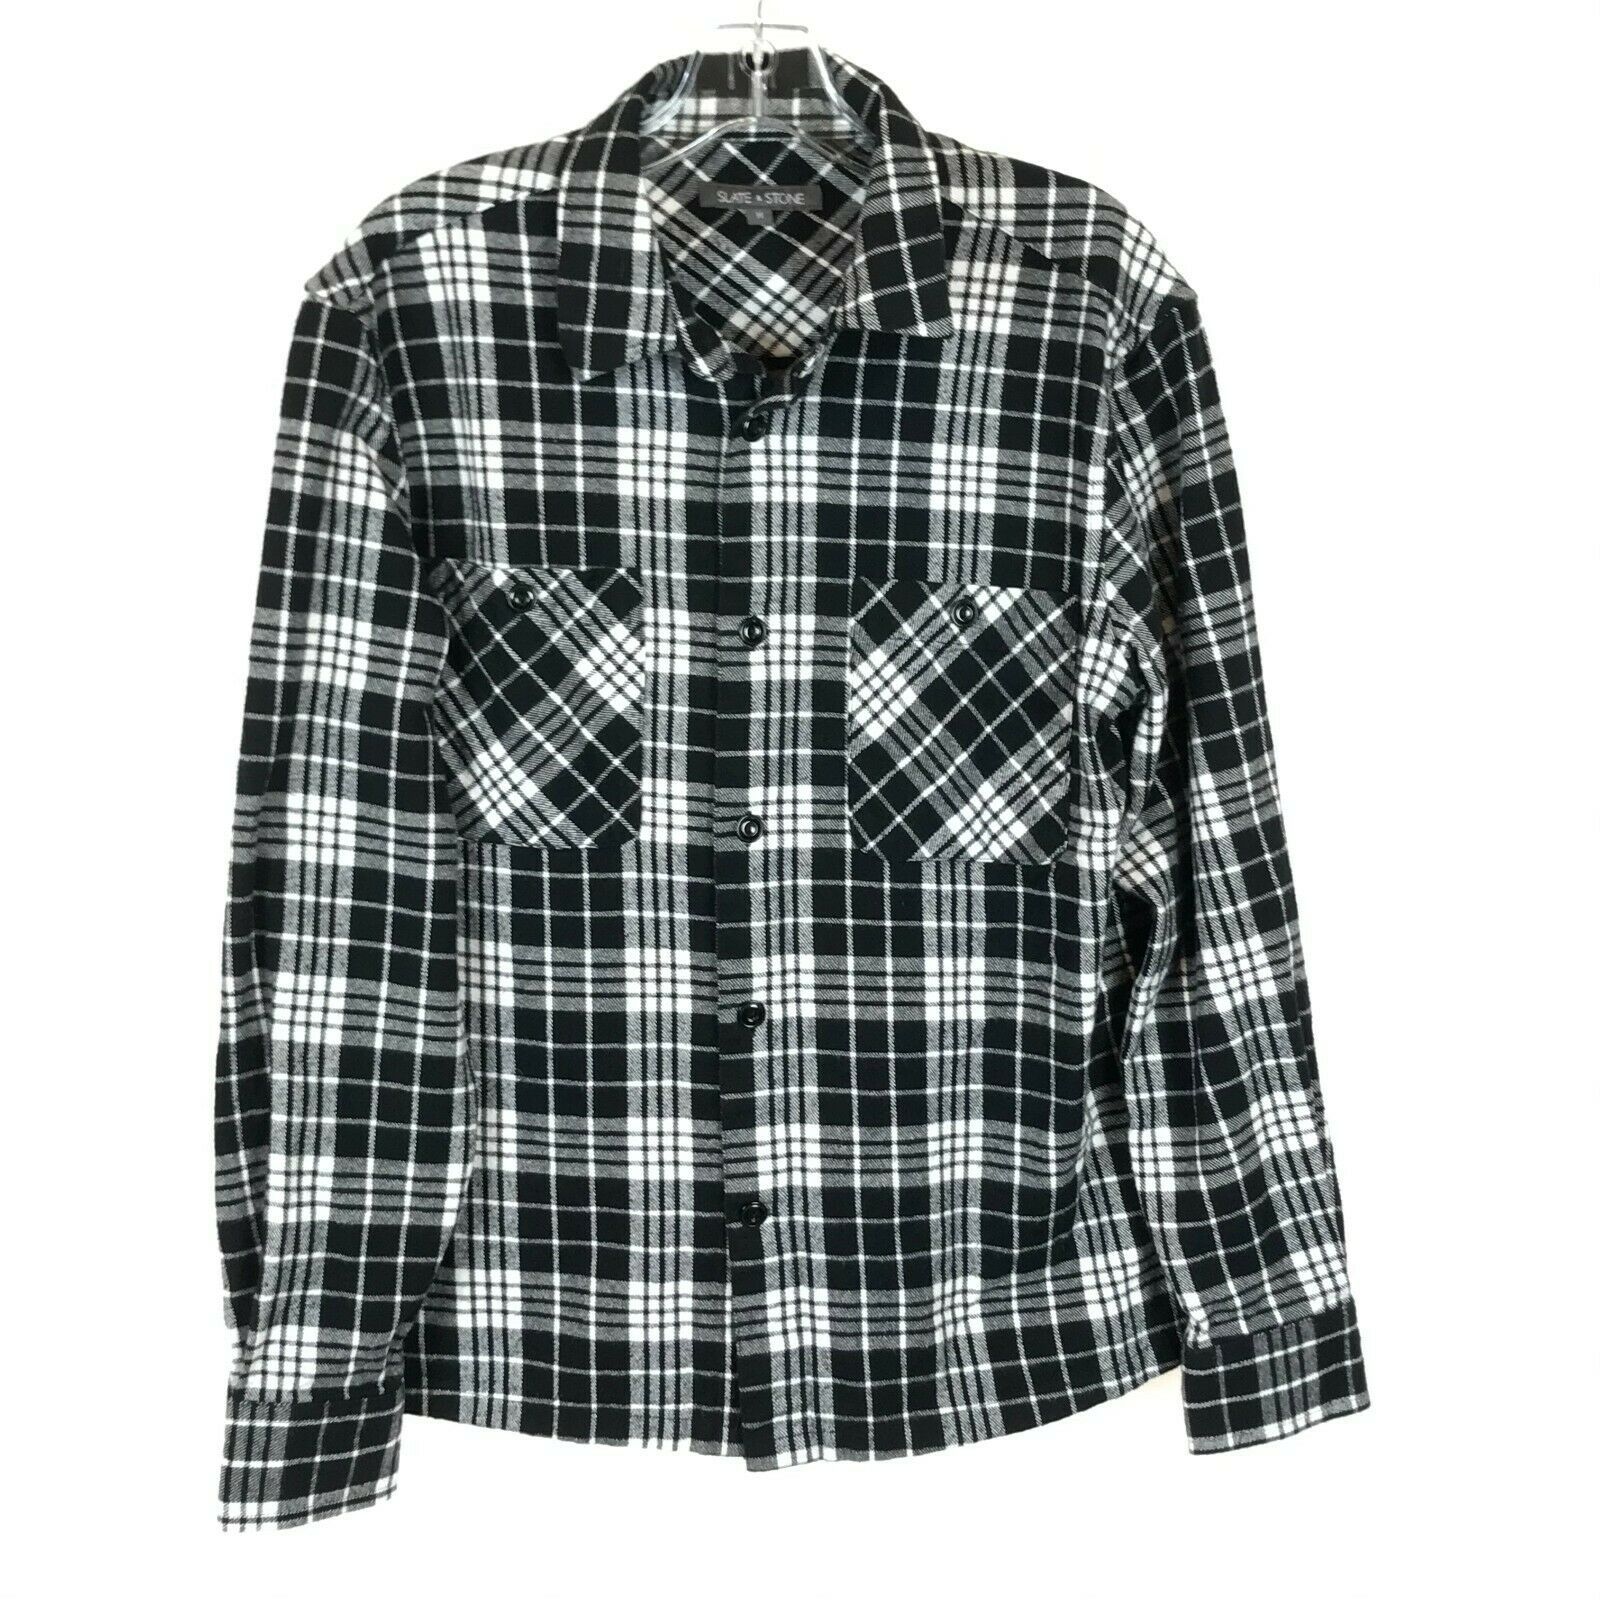 Primary image for Nordstrom Mens Size Medium Slate & Stone Plaid Button Down Heavy Flannel Shirt